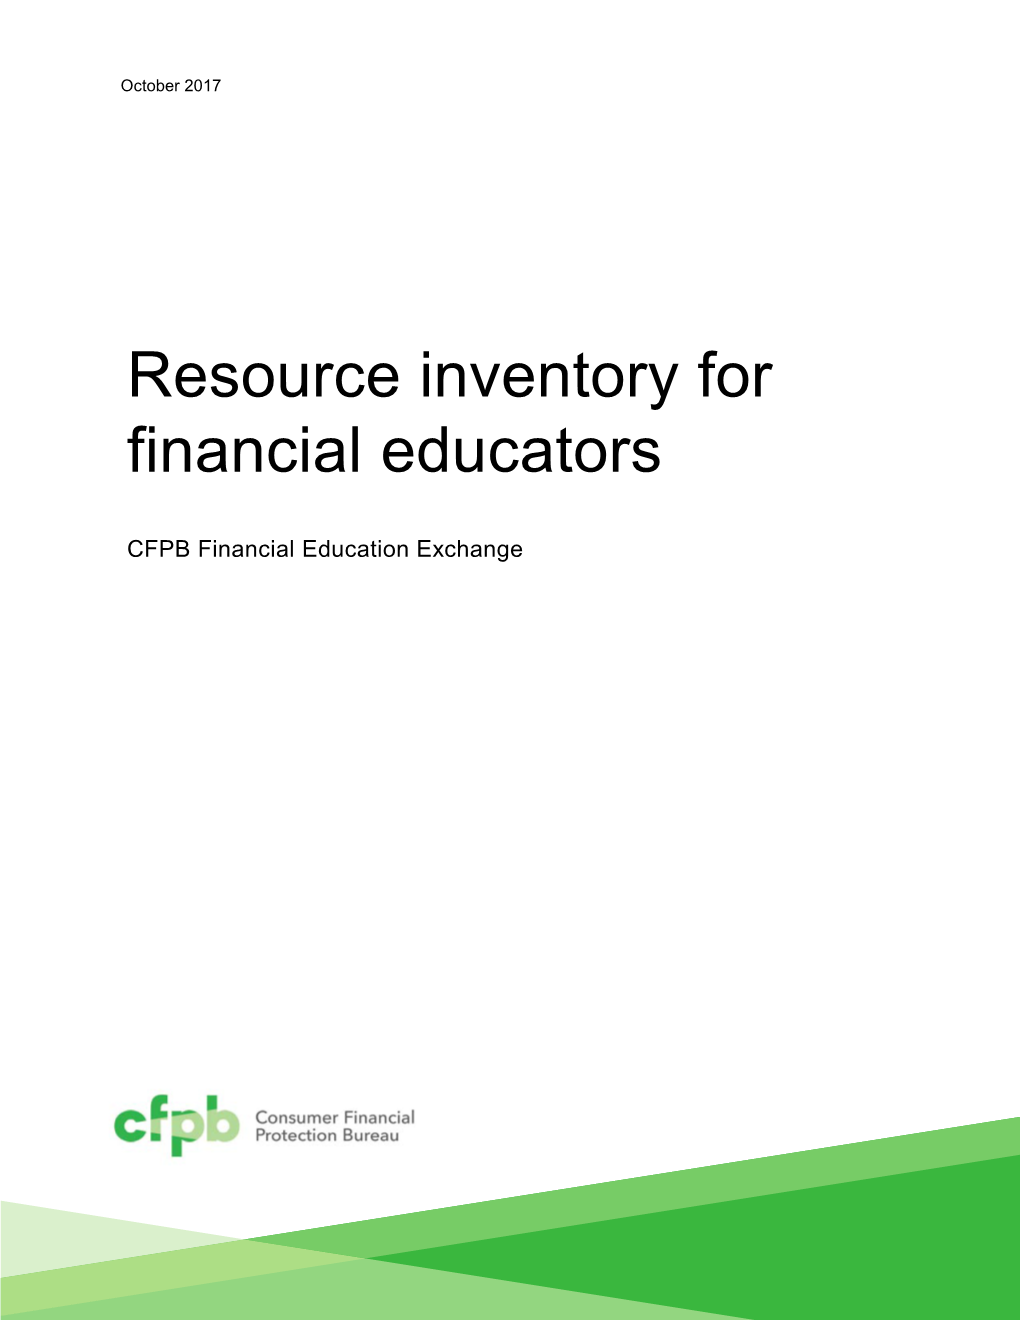 Resource Inventory for Financial Educators